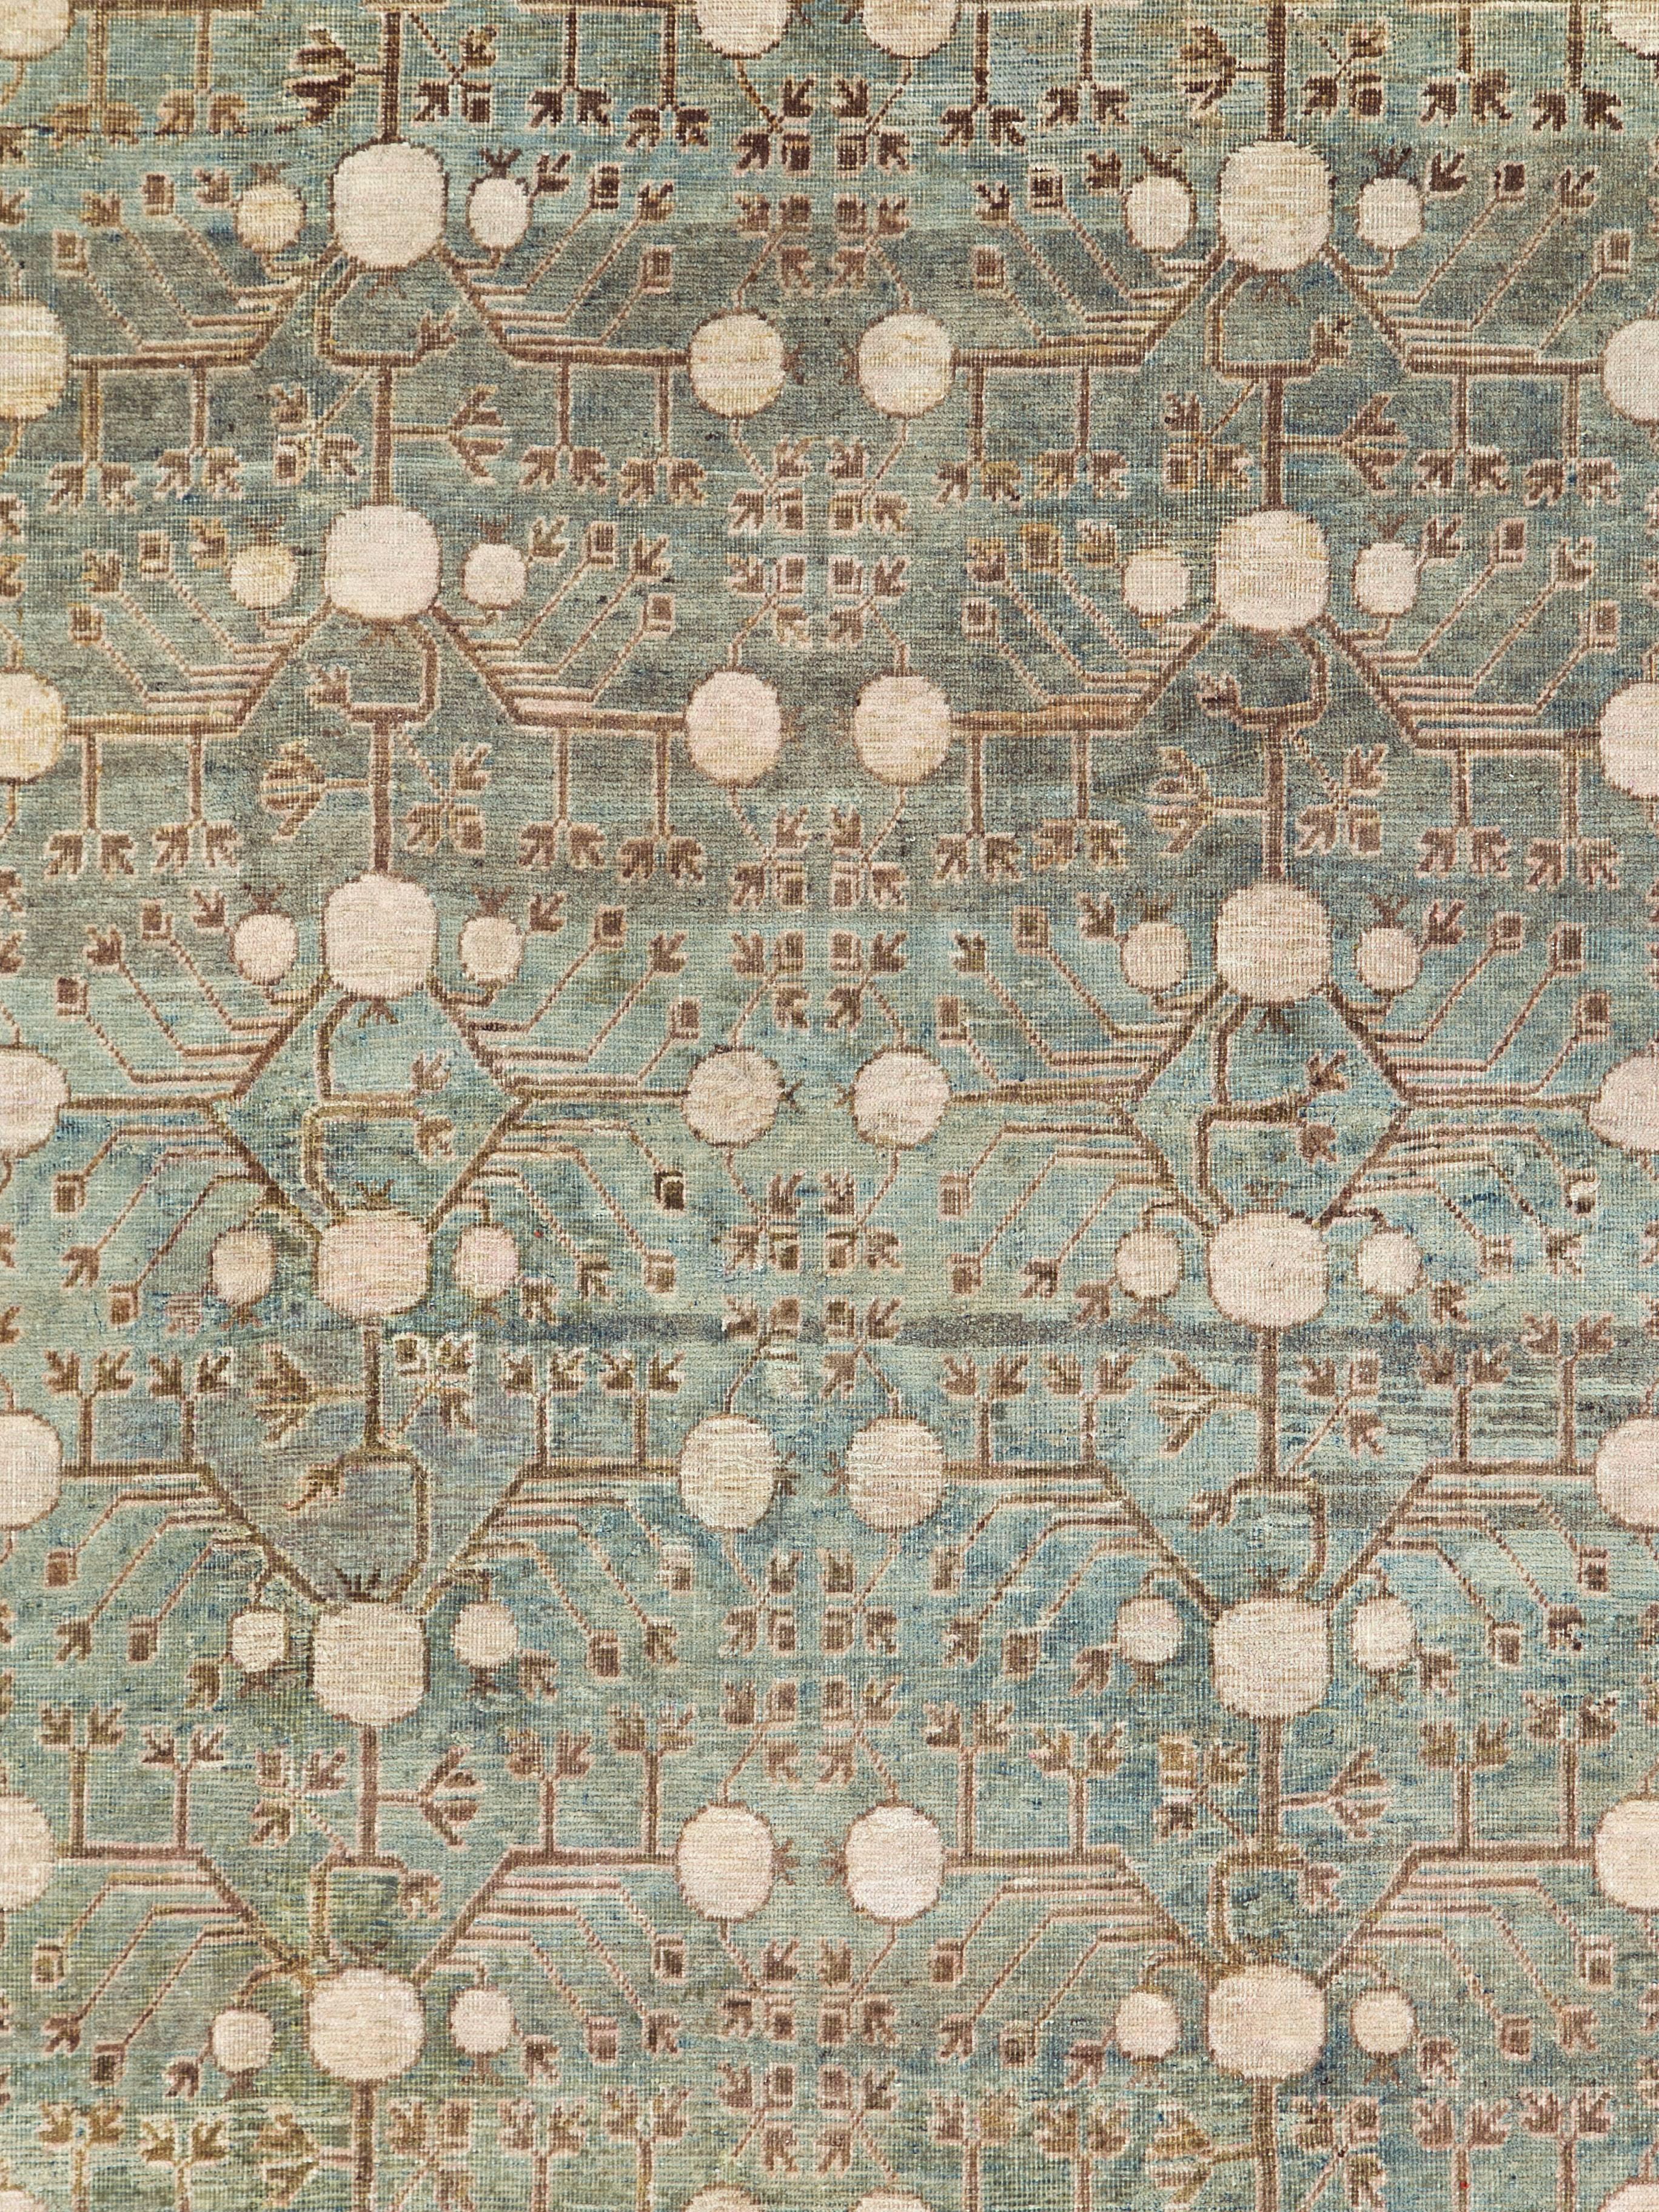 An antique East Turkestan Khotan rug from the early 20th century.